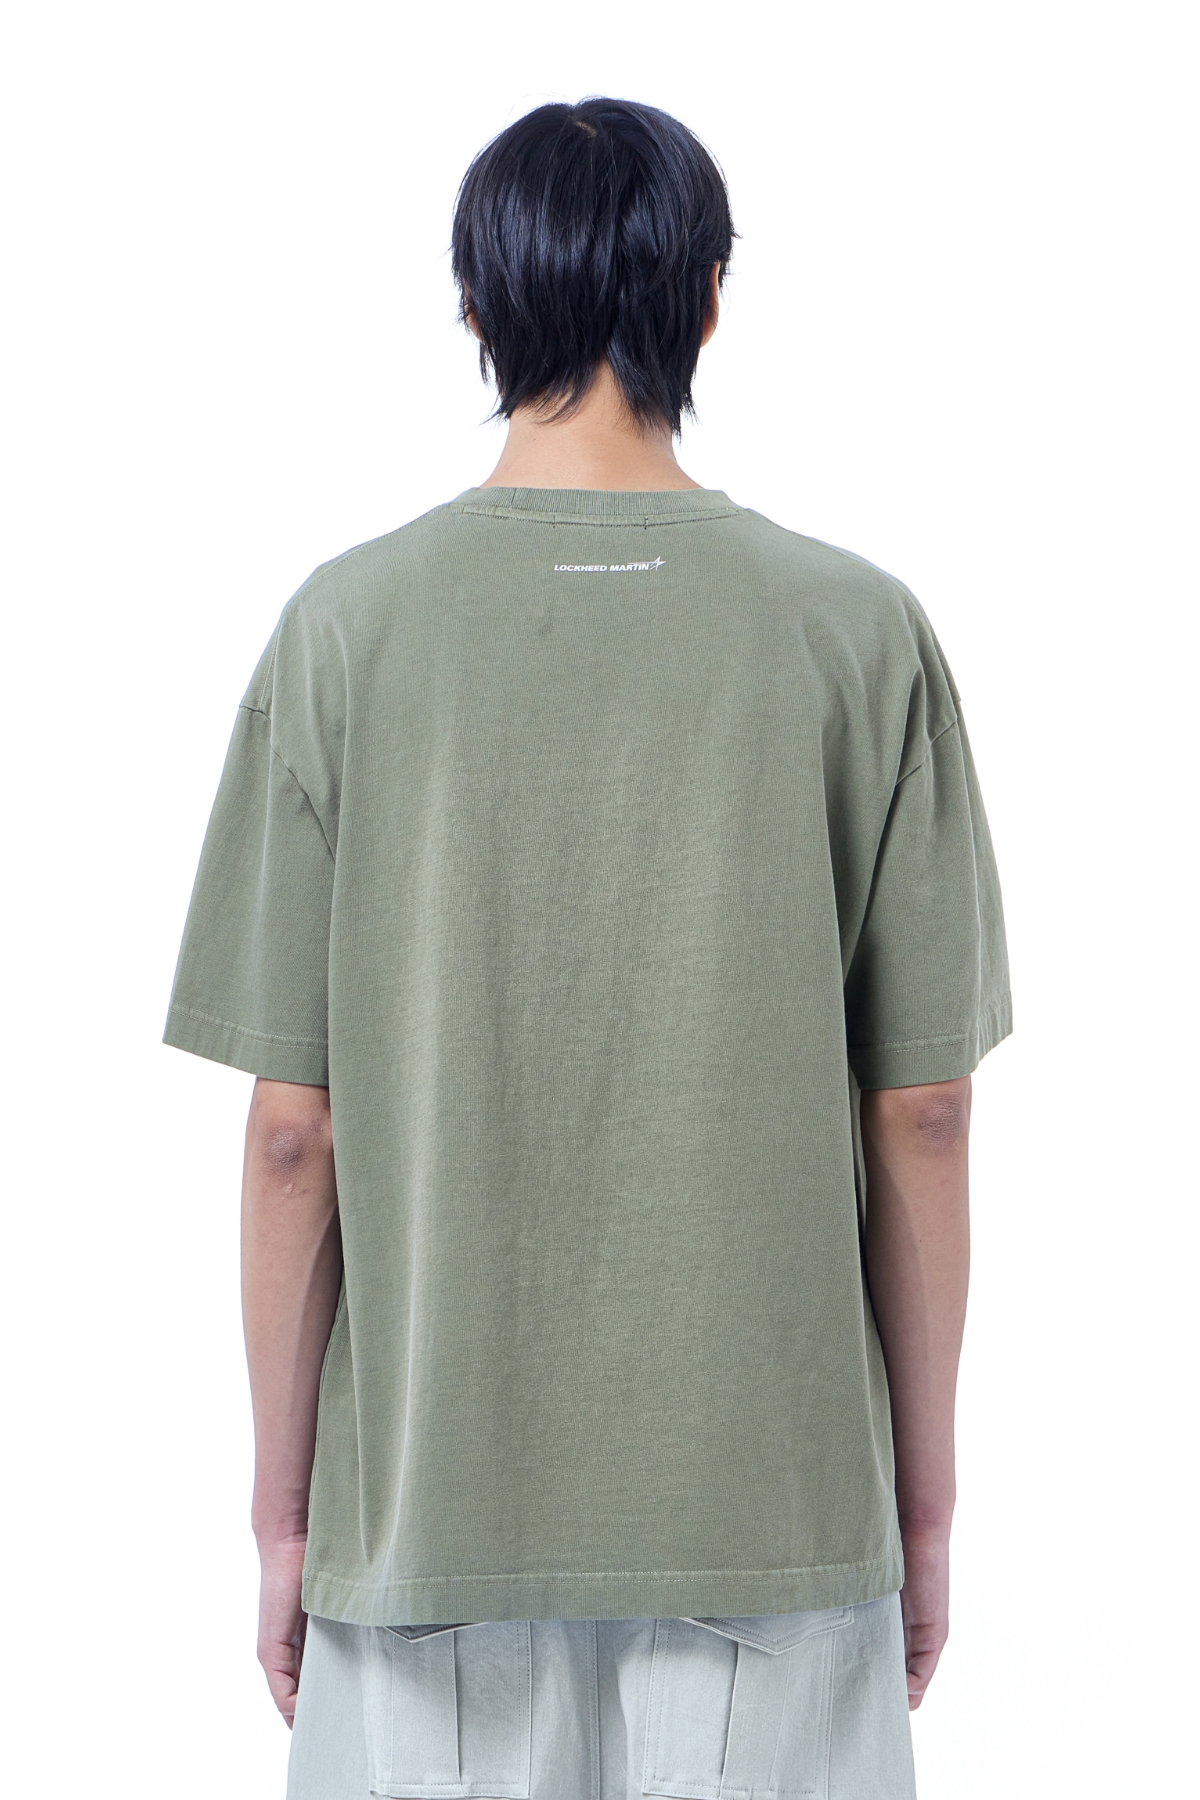 LM F-35 GRAPHIC GARMENT DYED OVER T-SHIRT (KHAKI)